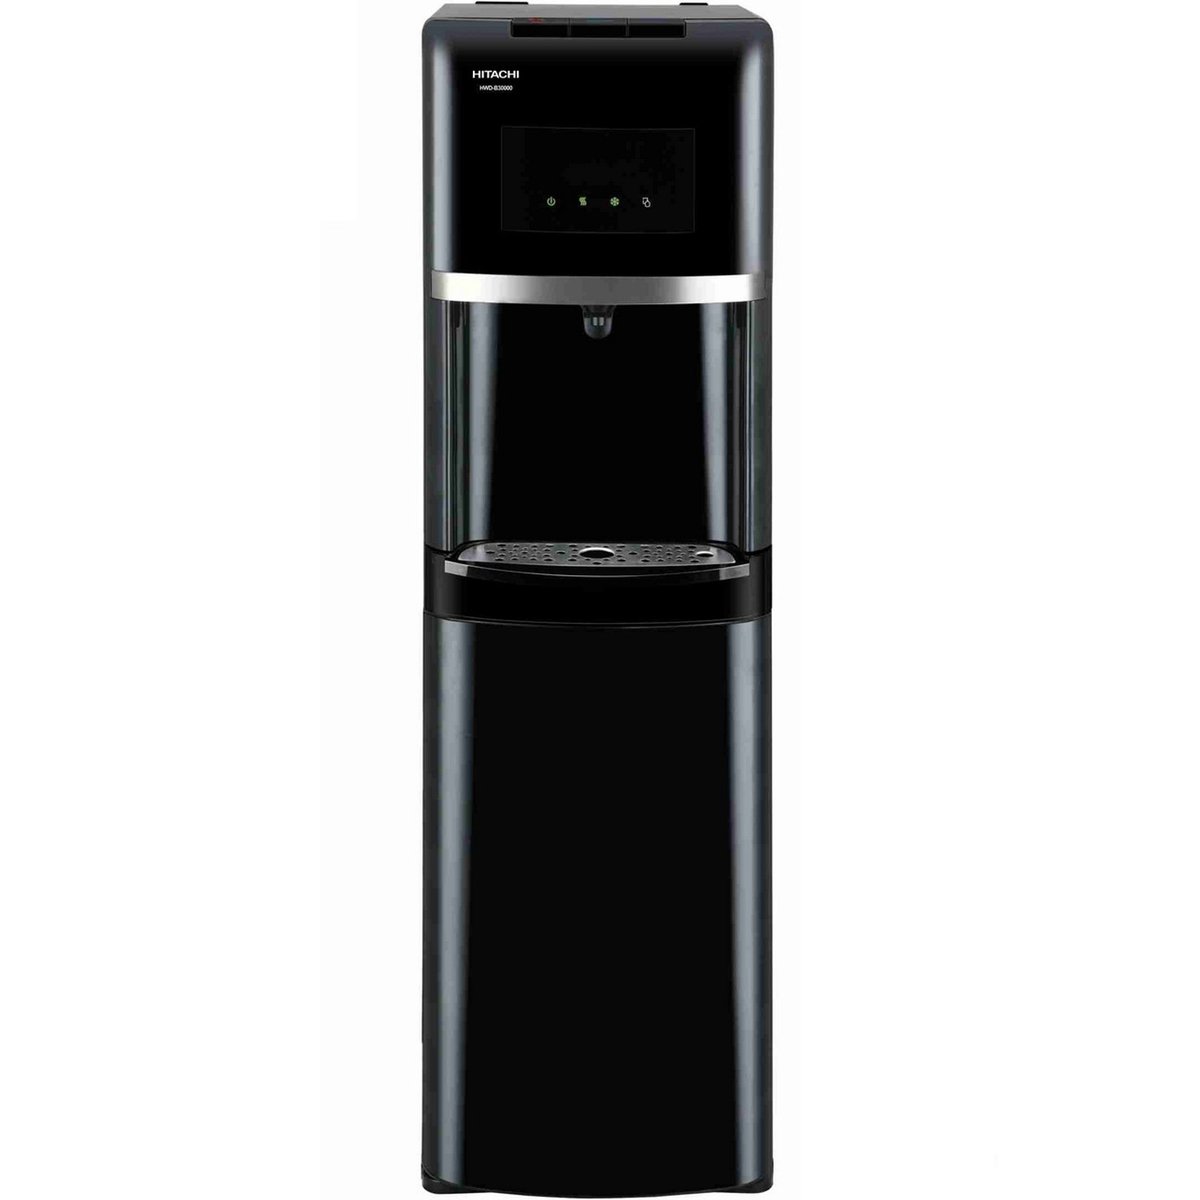 CROWNLINE TABLE TOP WATER DISPENSER WITH ICE MAKER - WD-267